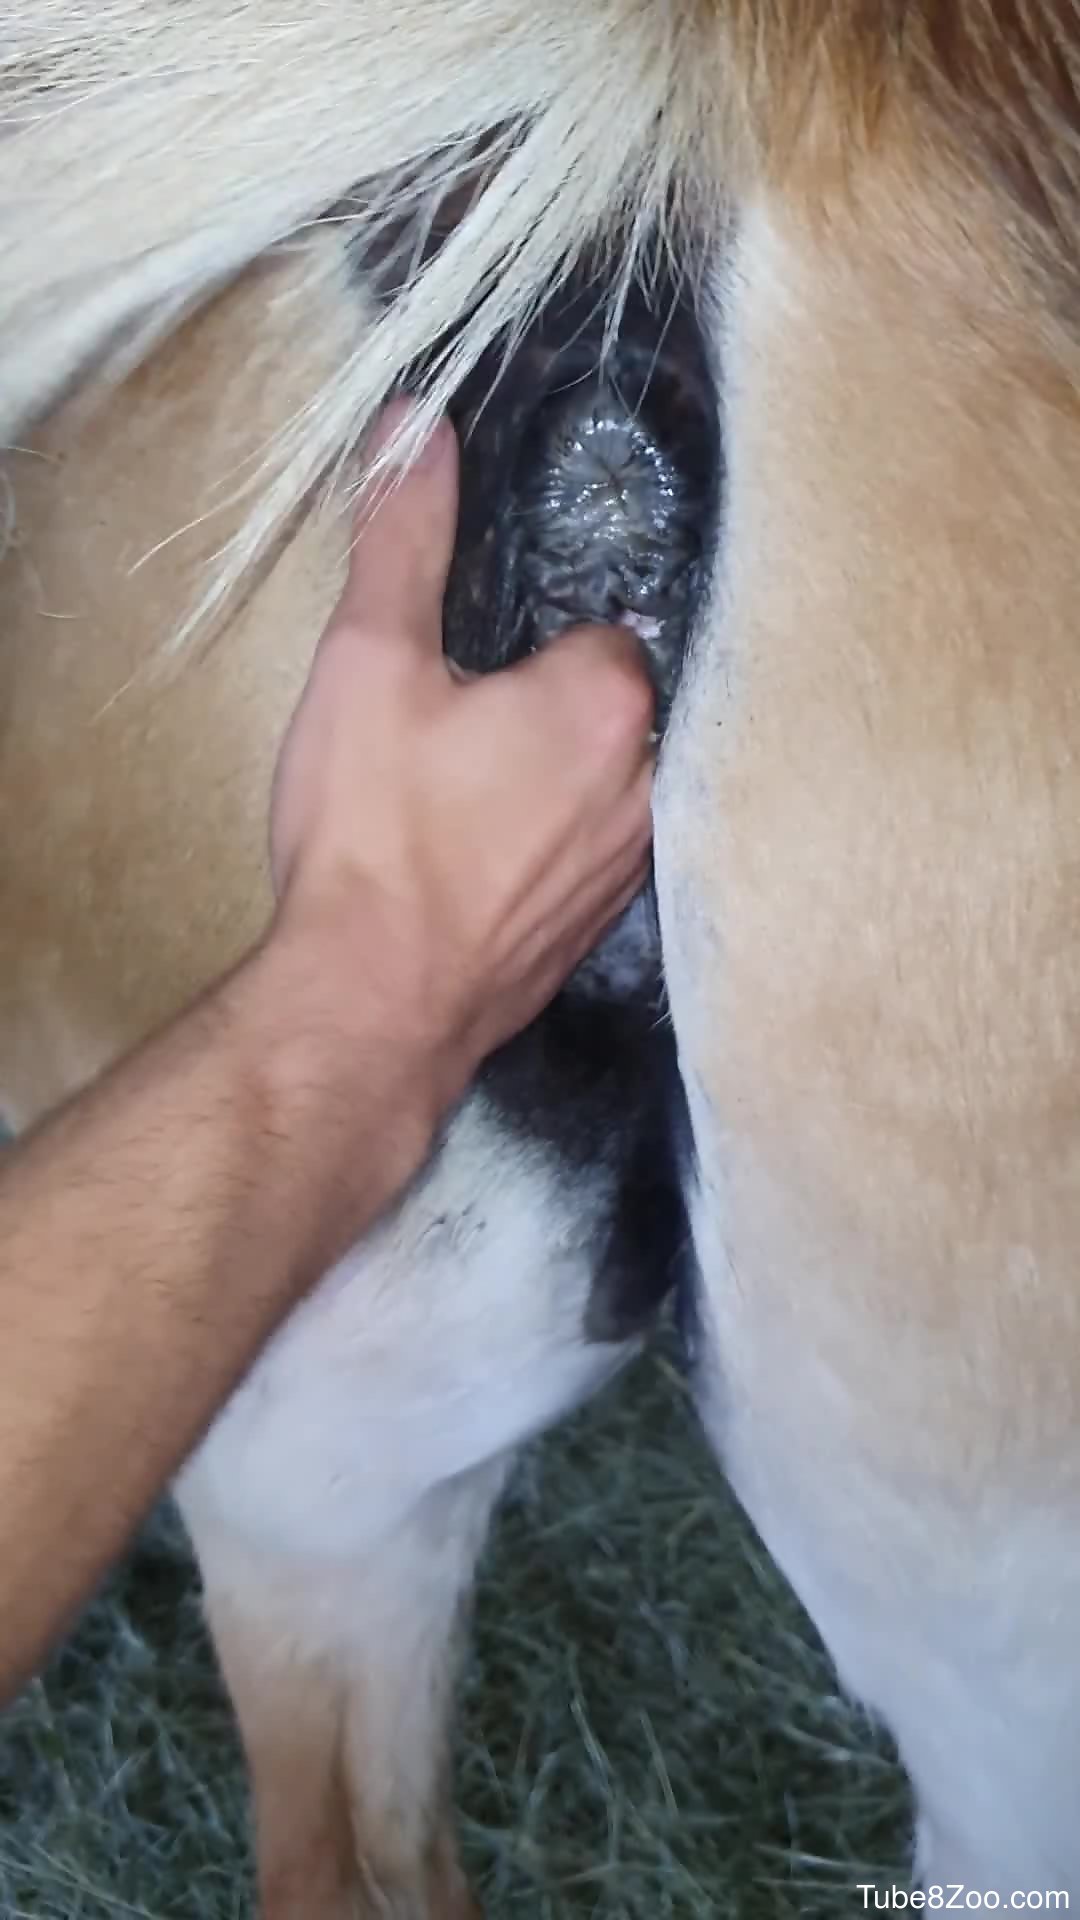 Man Fucks Mare Anal - Man finger fucks horse in the ass and records himself